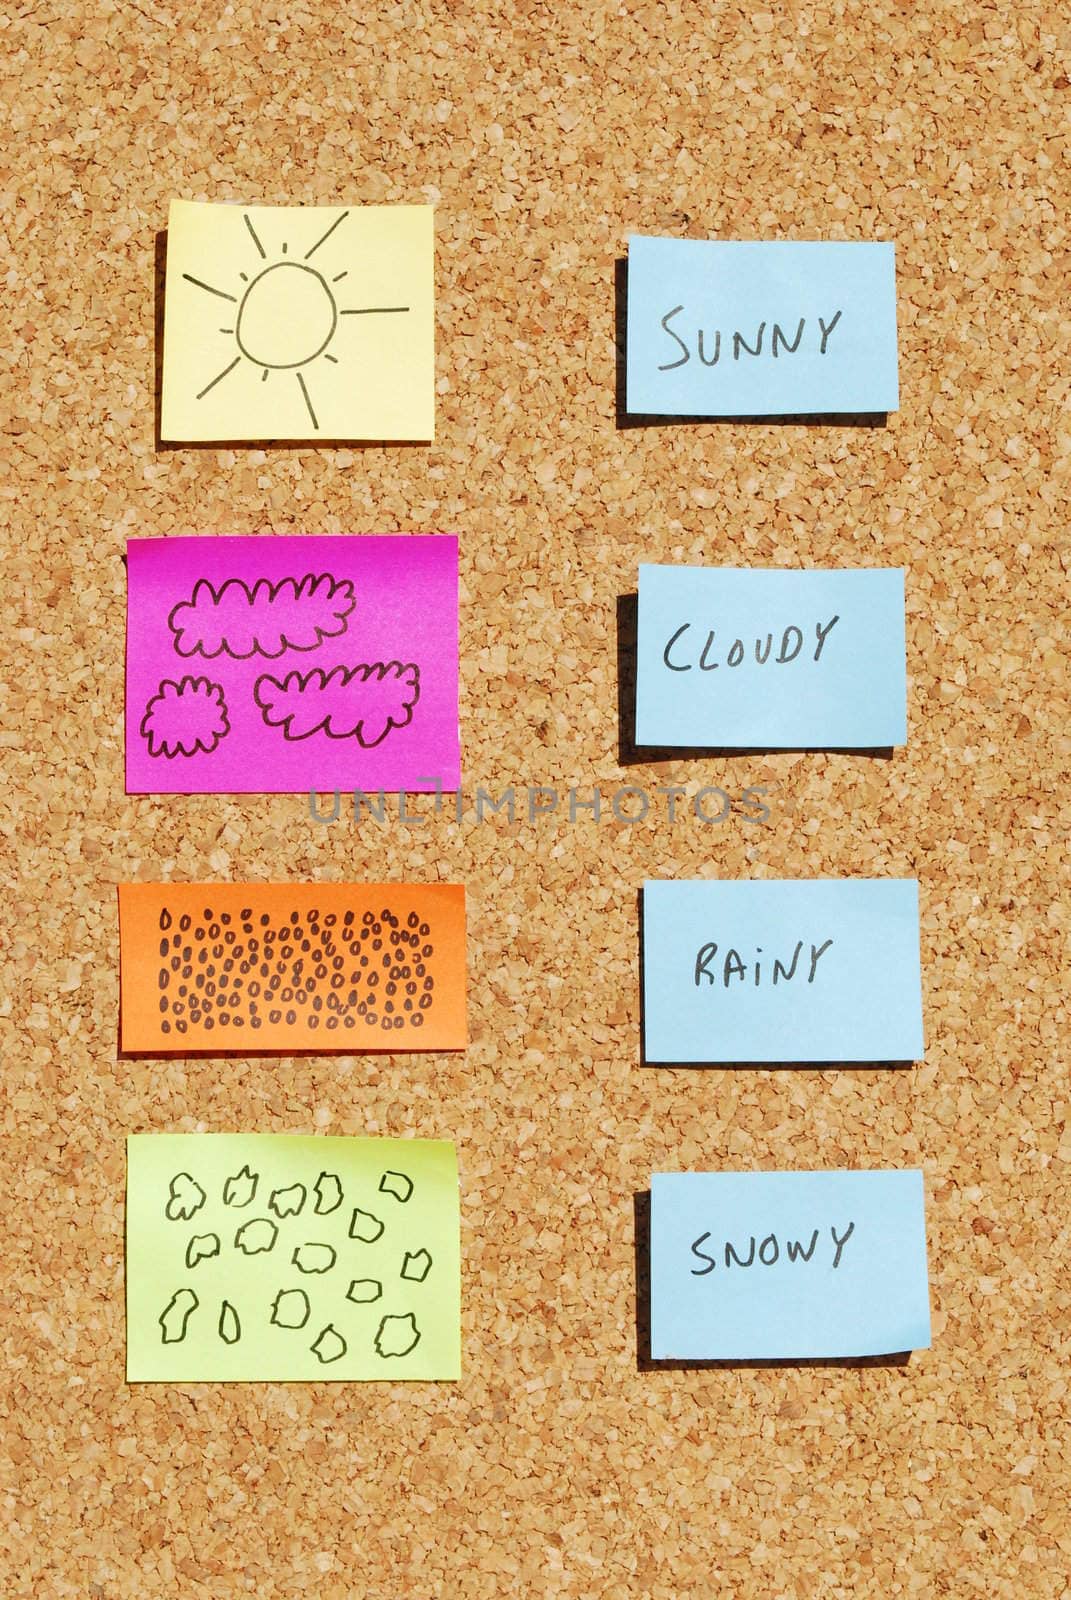 Weather changes on a cork board by luissantos84